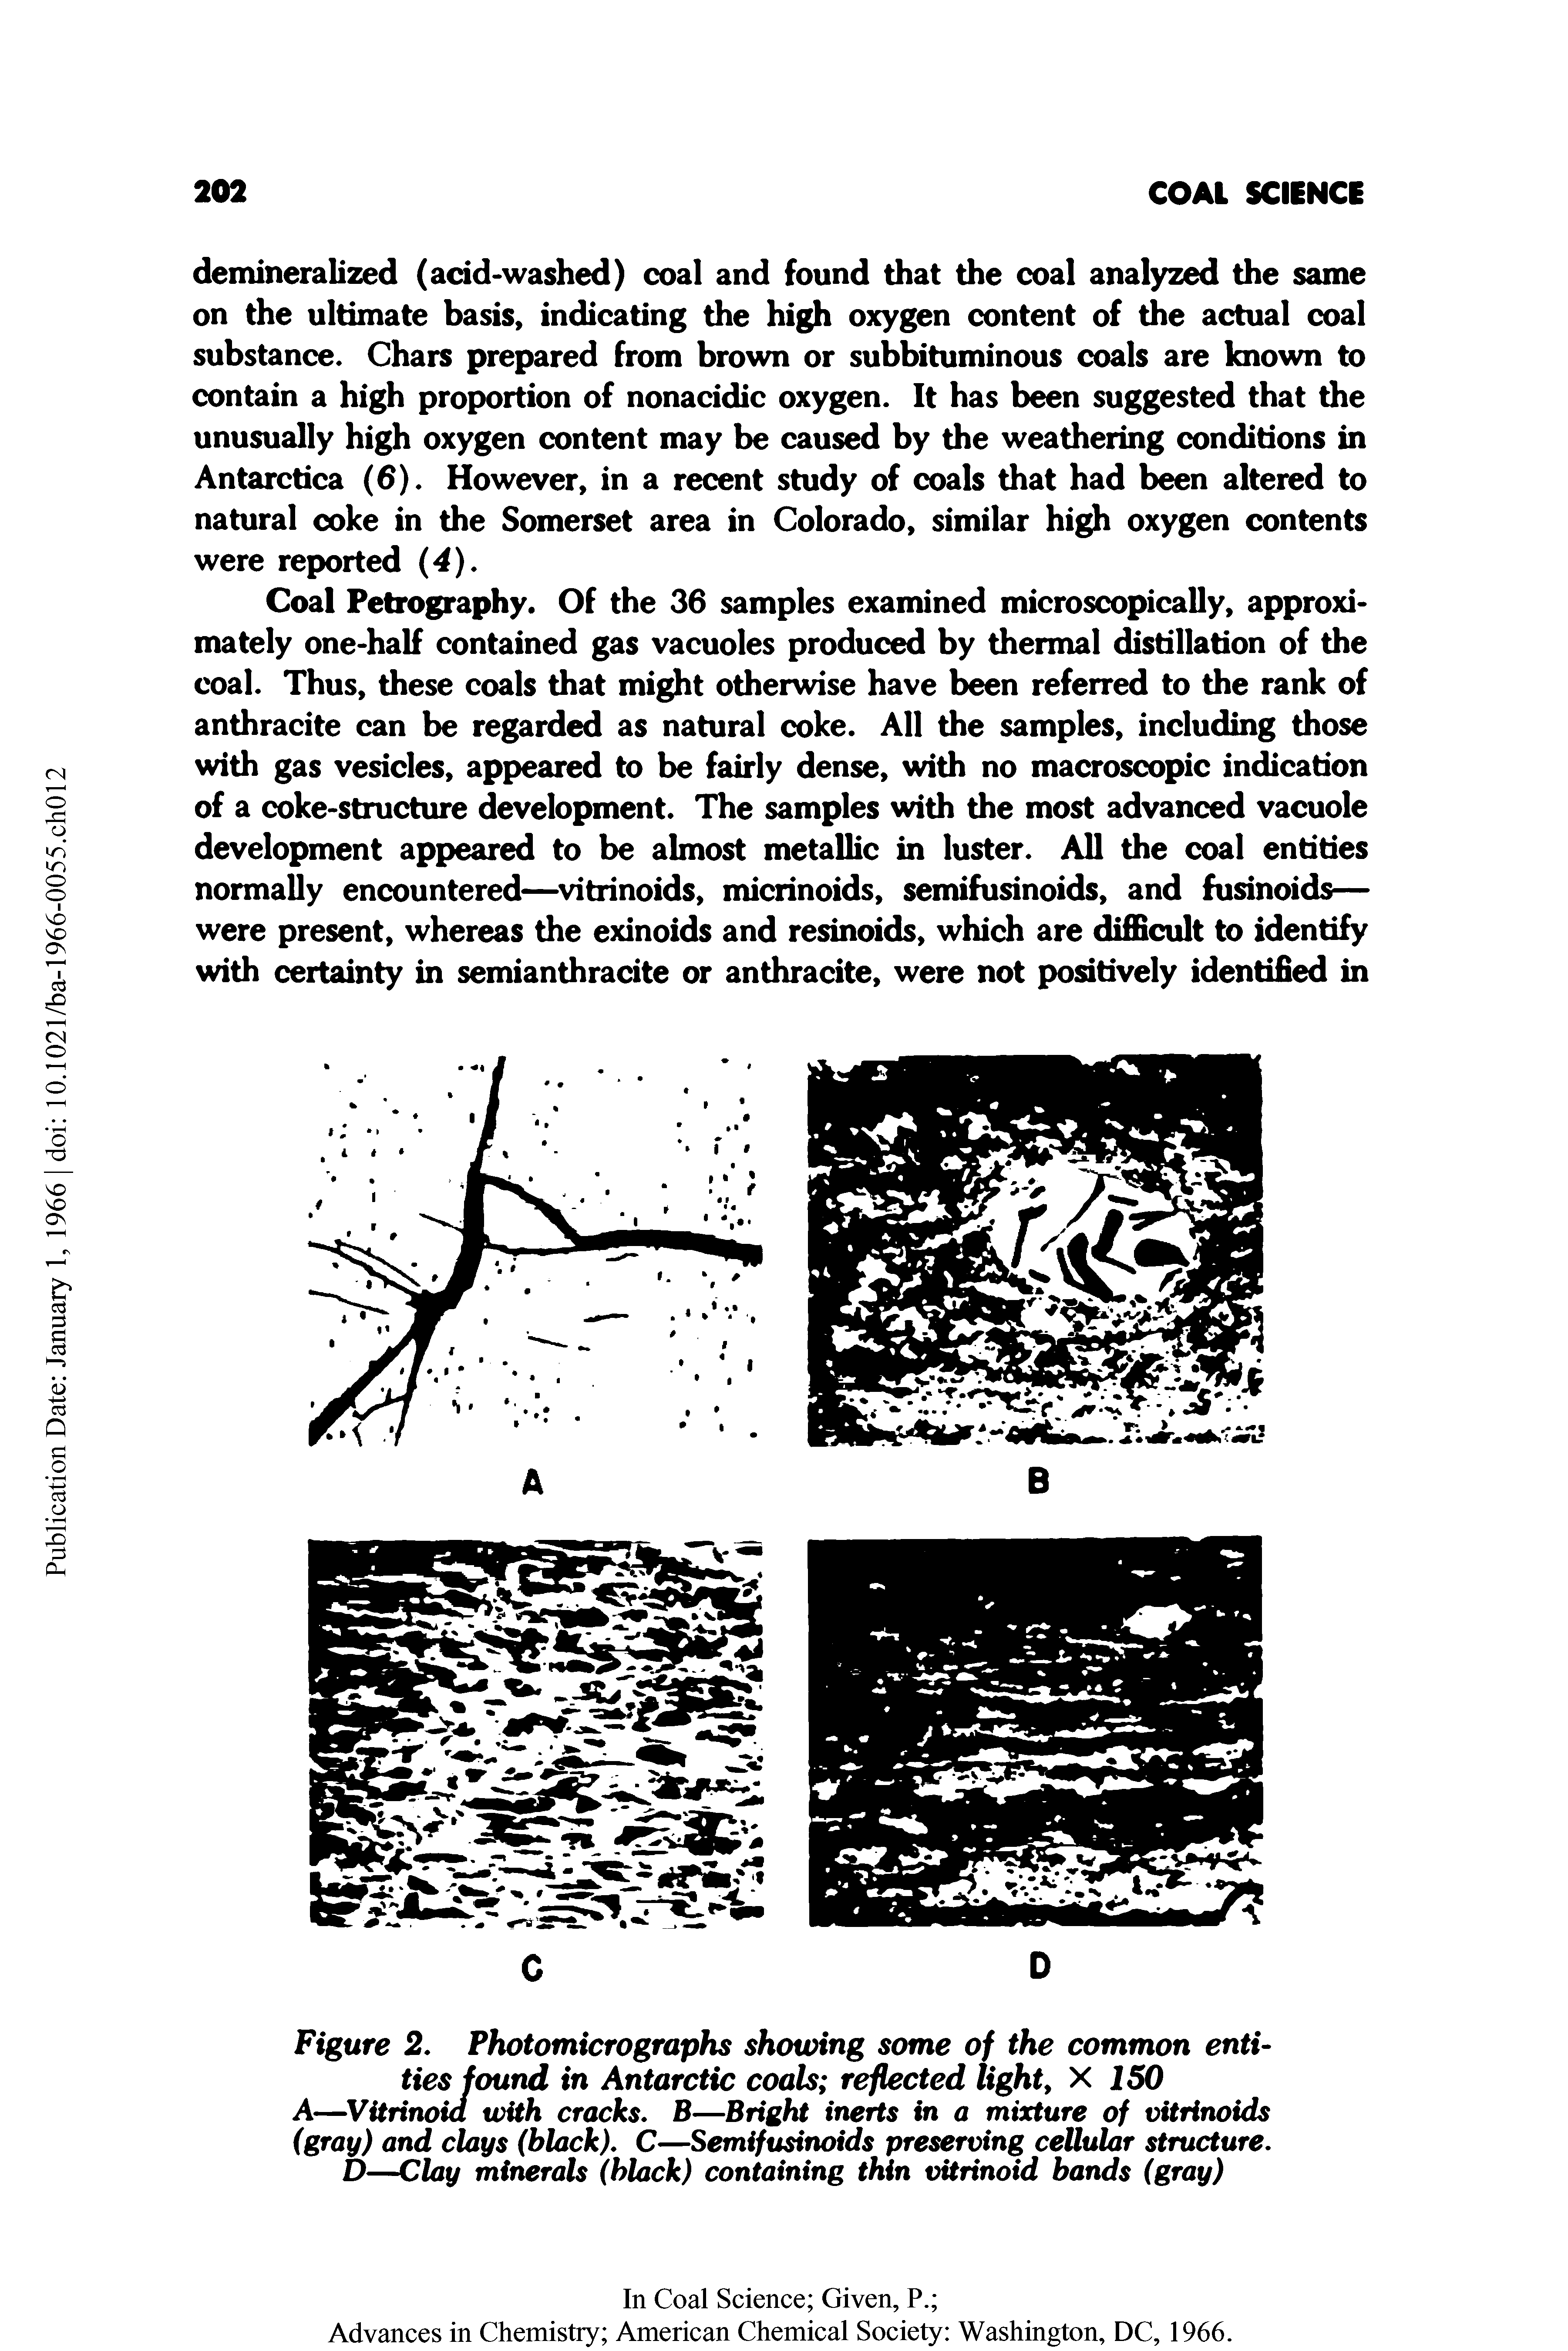 Figure 2. Photomicrographs showing some of the common entities found in Antarctic coals reflected light, X 150 A—Vitrinoia with cracks. B—Bright inerts in a mixture of vitrinoids (gray) and clays (black), C—Semifusinoids preserving cellular structure. D—Clay minerals (black) containing thin vitrinoid bands (gray)...